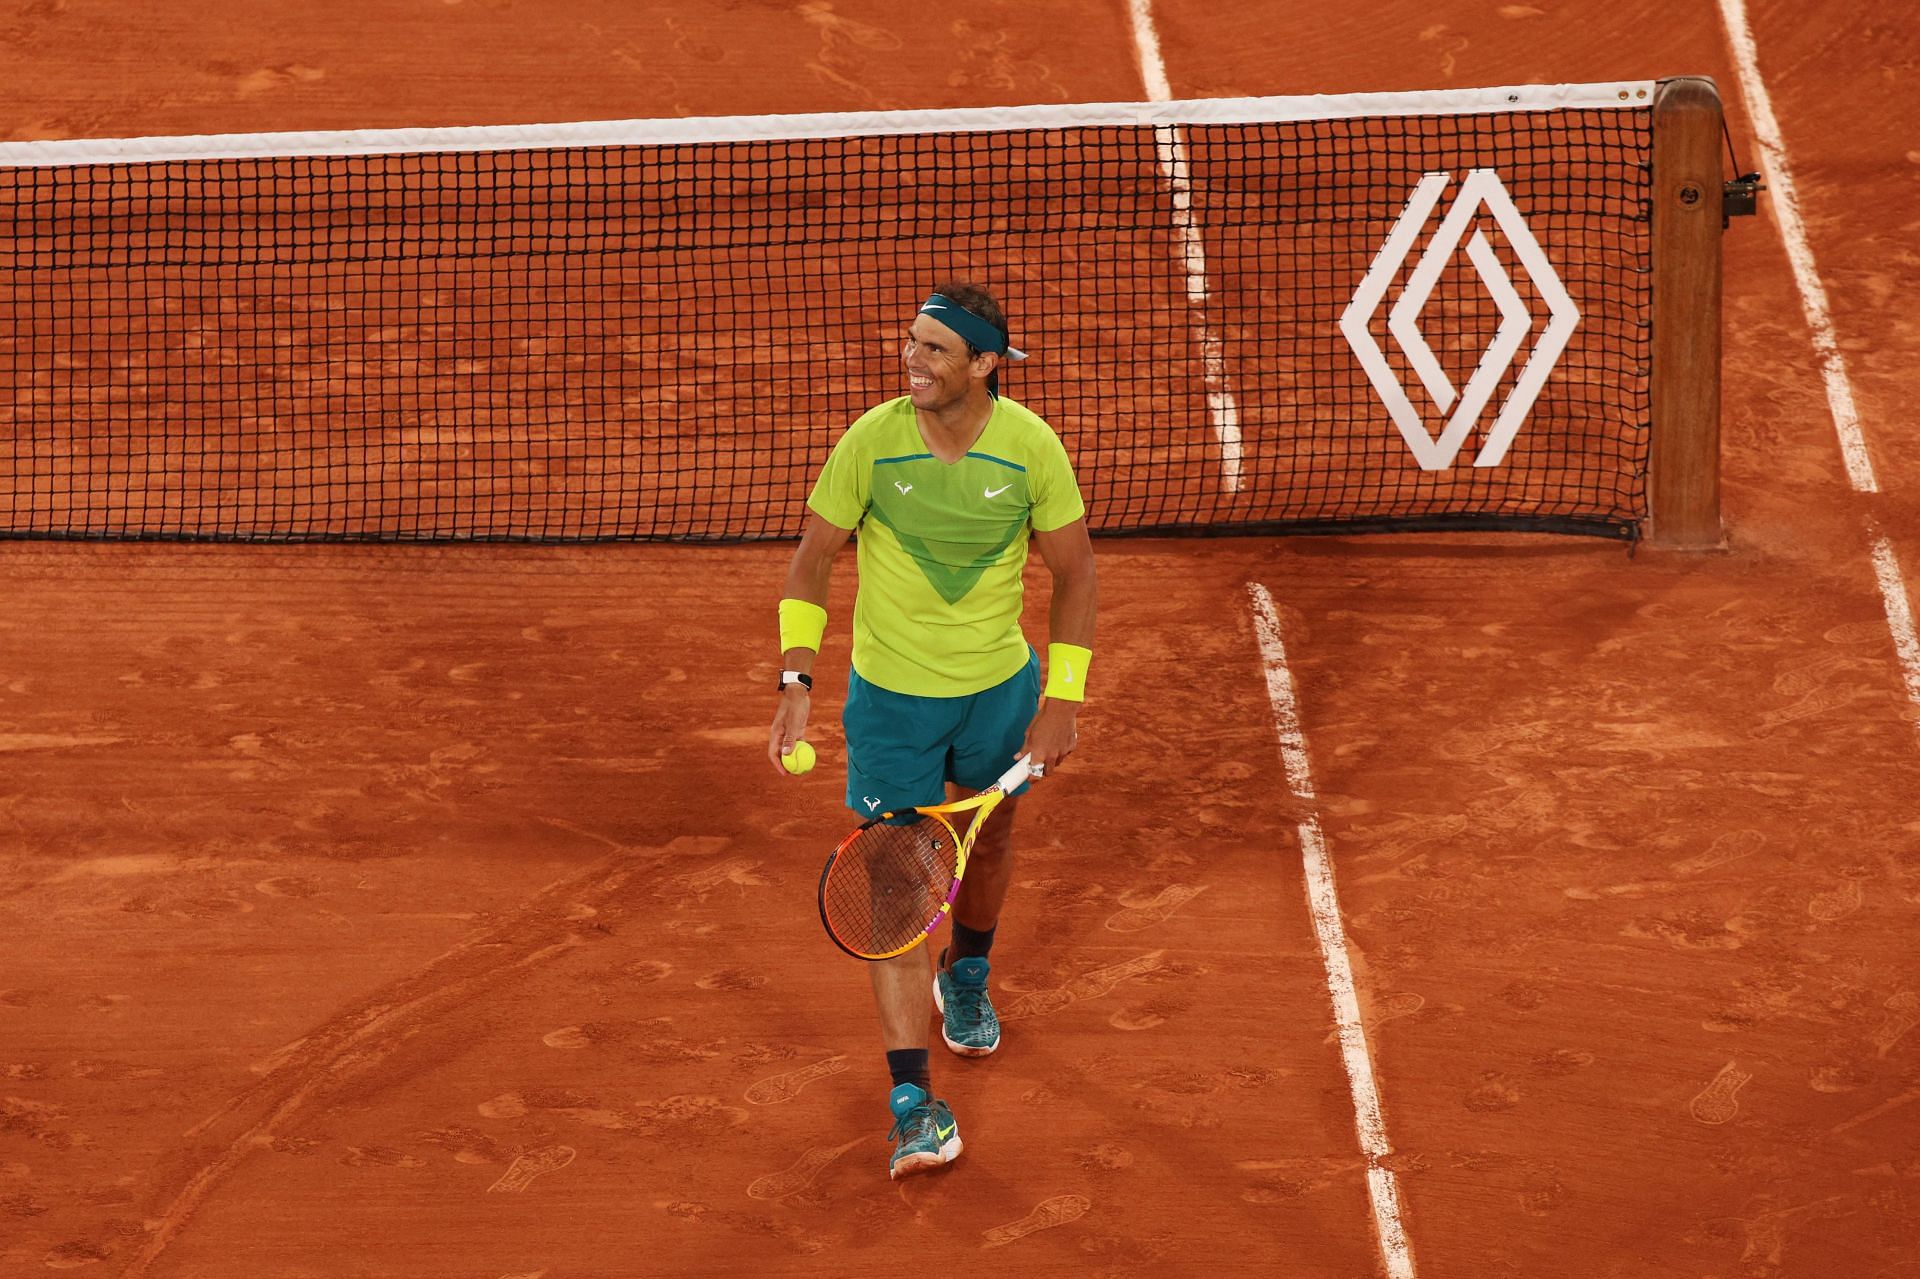 Rafael Nadal faces Alexander Zverev in the semifinals of the French Open